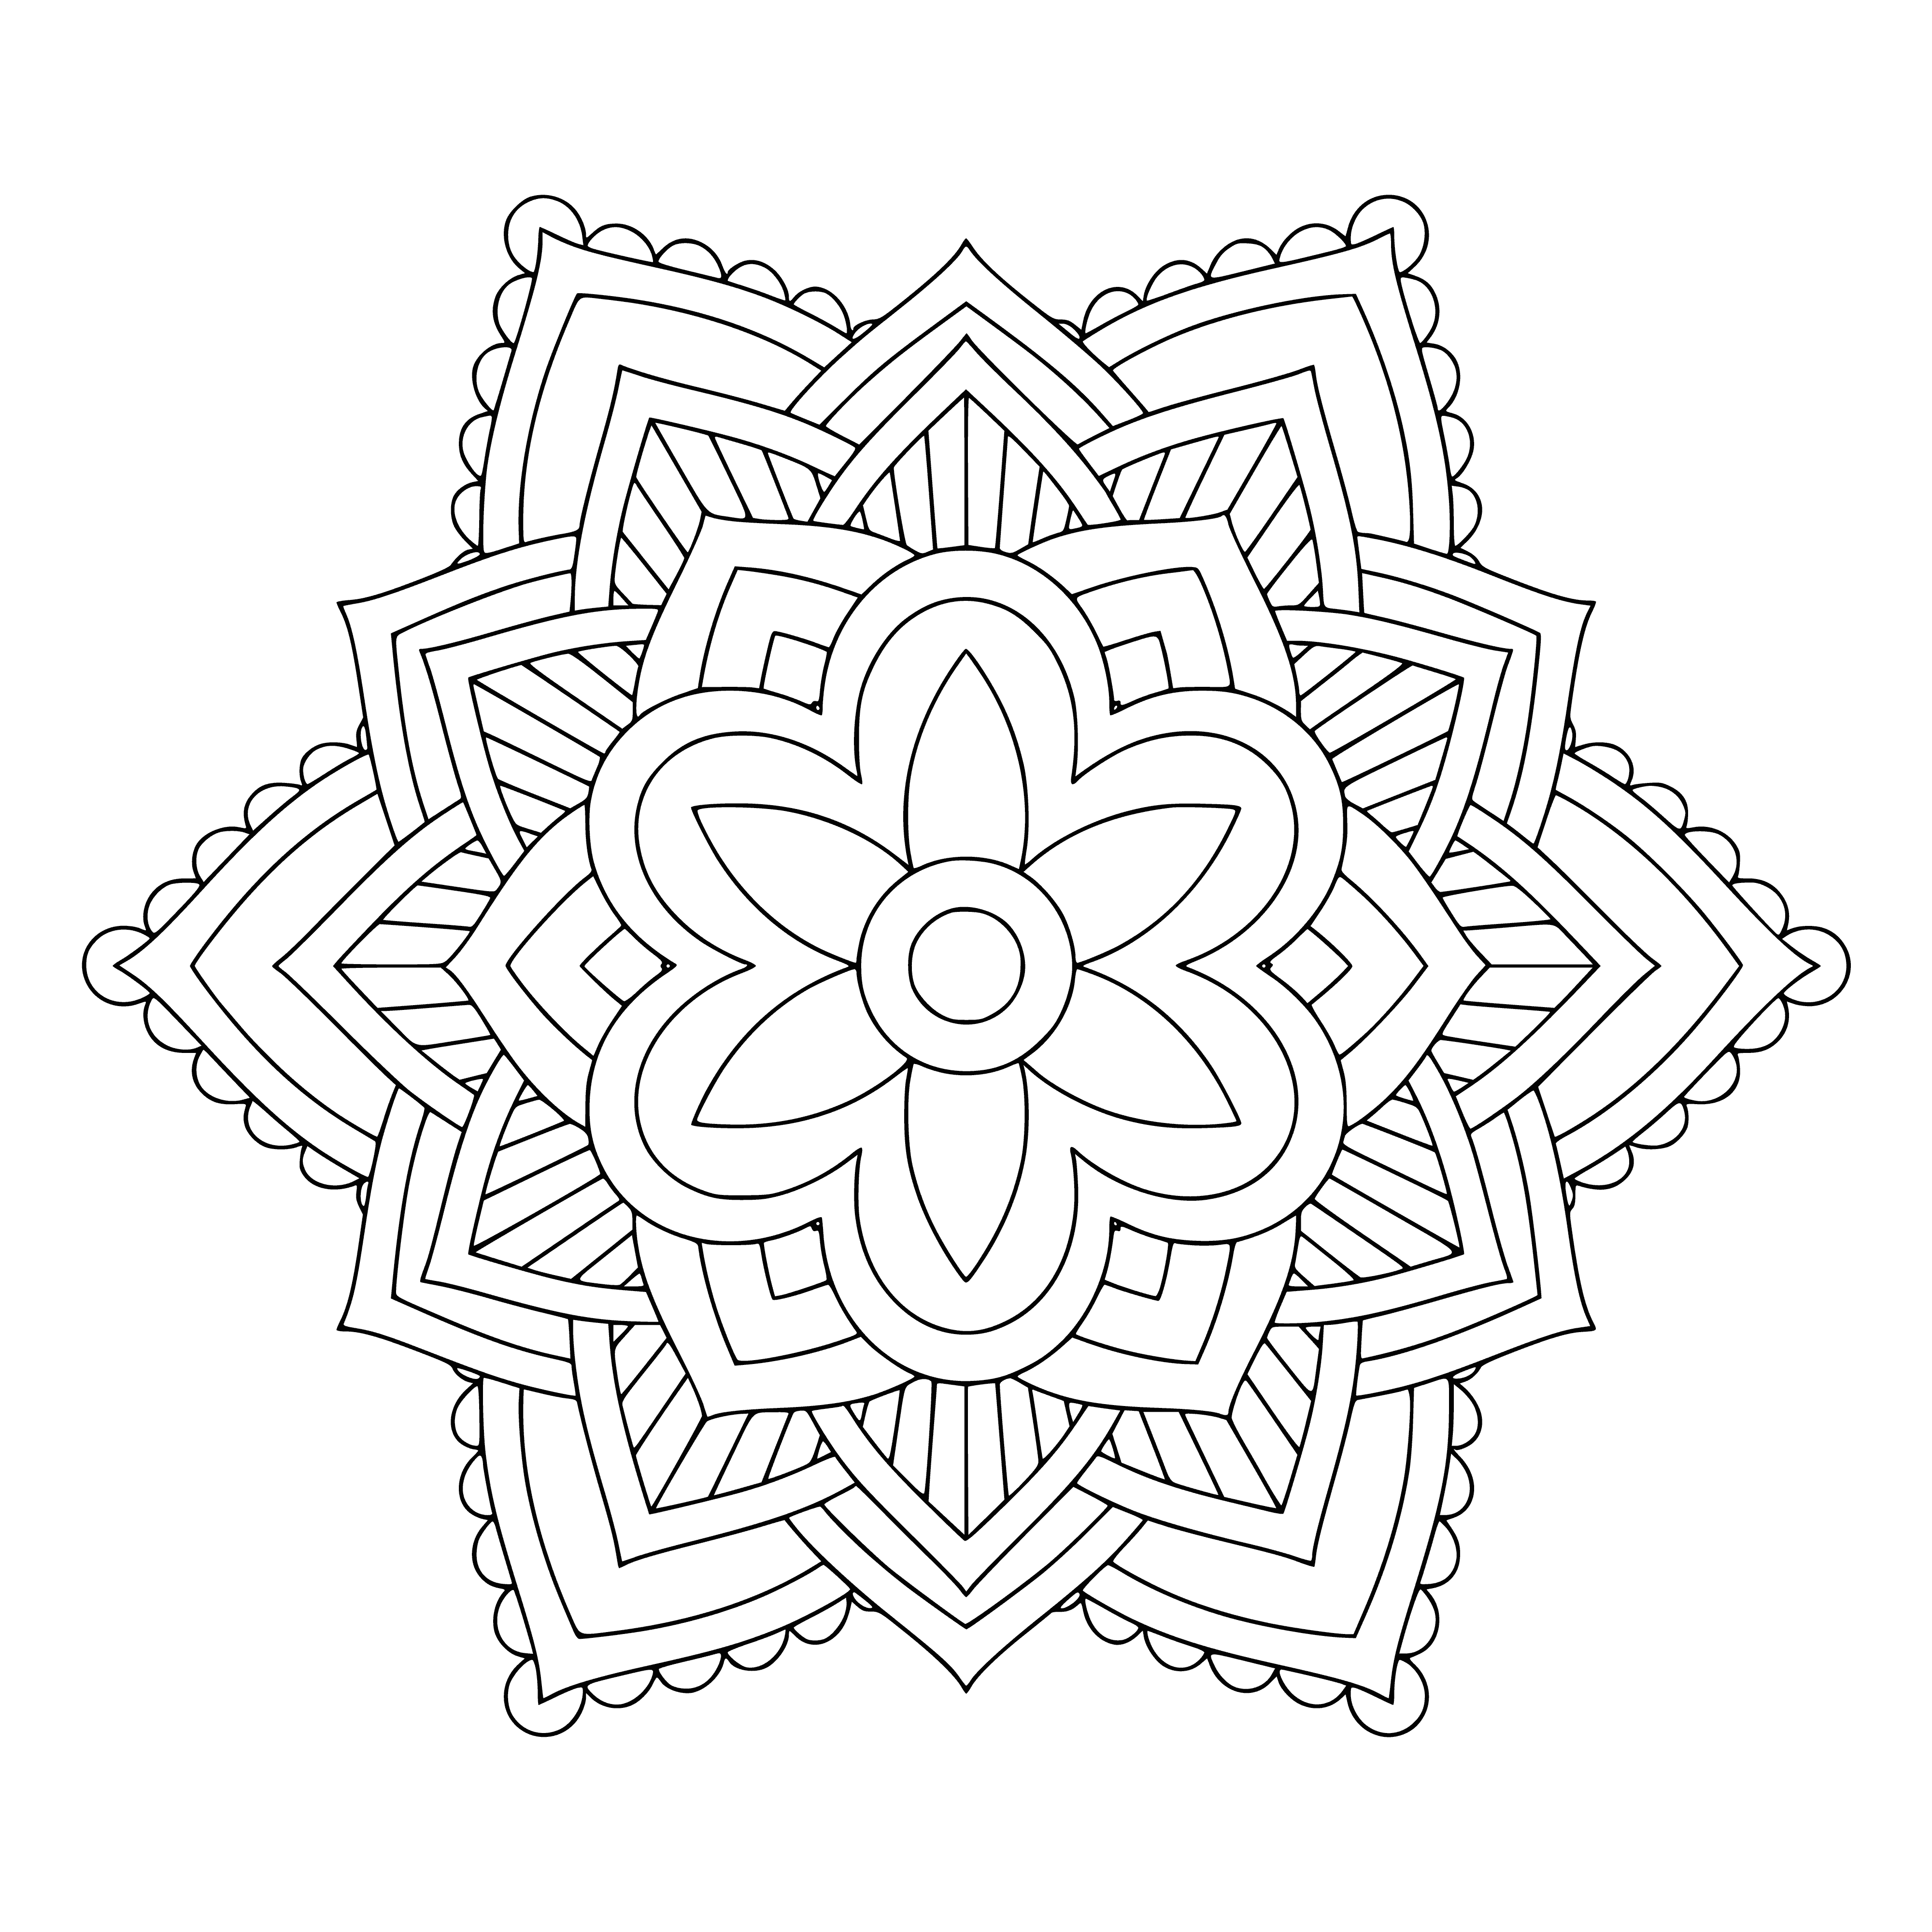 coloring page: Person sitting at desk coloring in a flower mandala with some petals & leaves colored in blue, purple, pink & green. #Mandalas